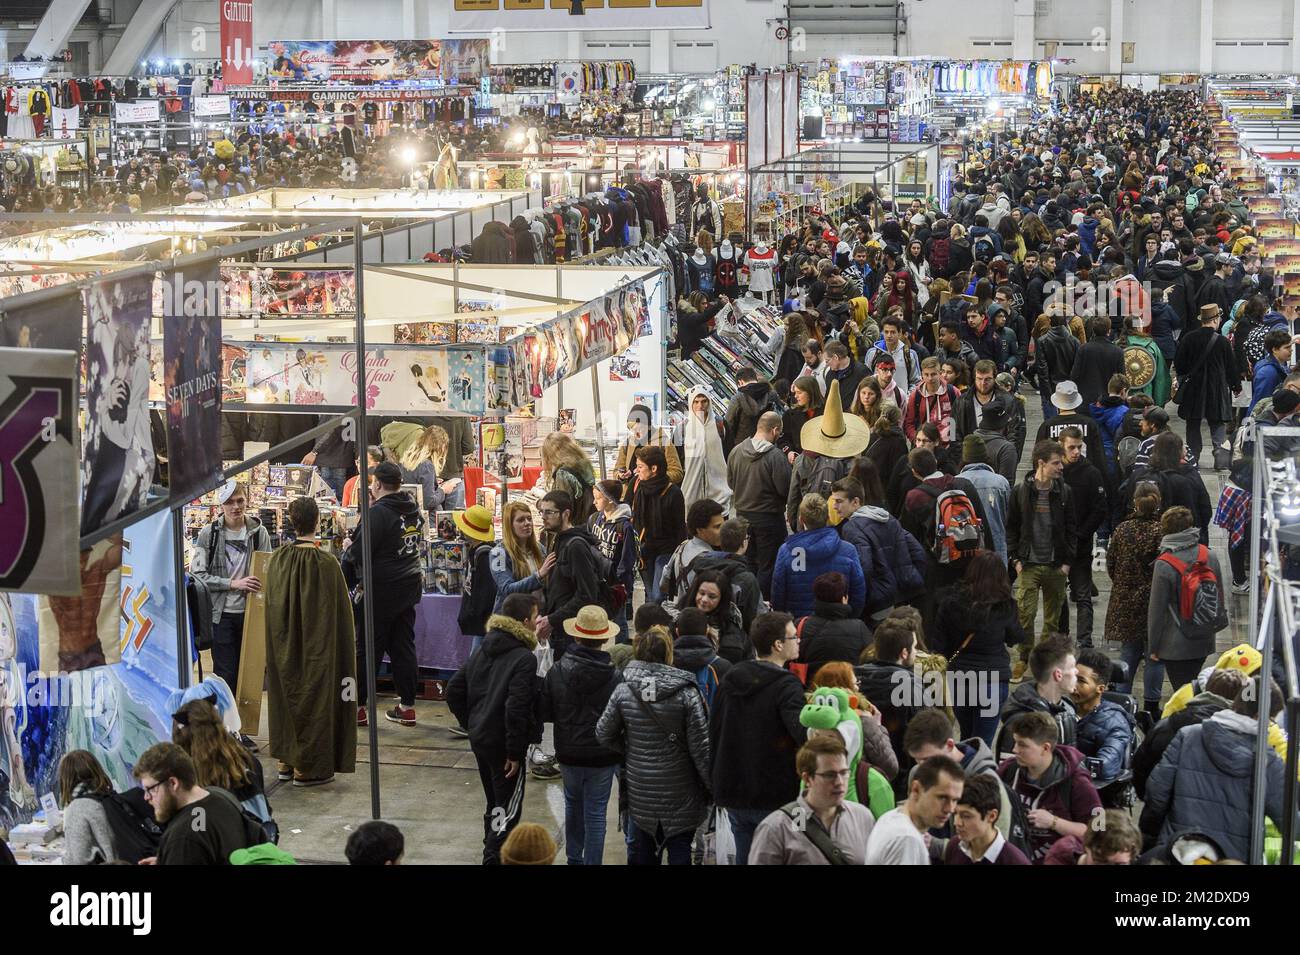 Ninth edition of Made in Asia in Brussels foule dans les allees | Neuvieme edition du salon Made in Asia - crowded alleys 17/03/2018 Stock Photo